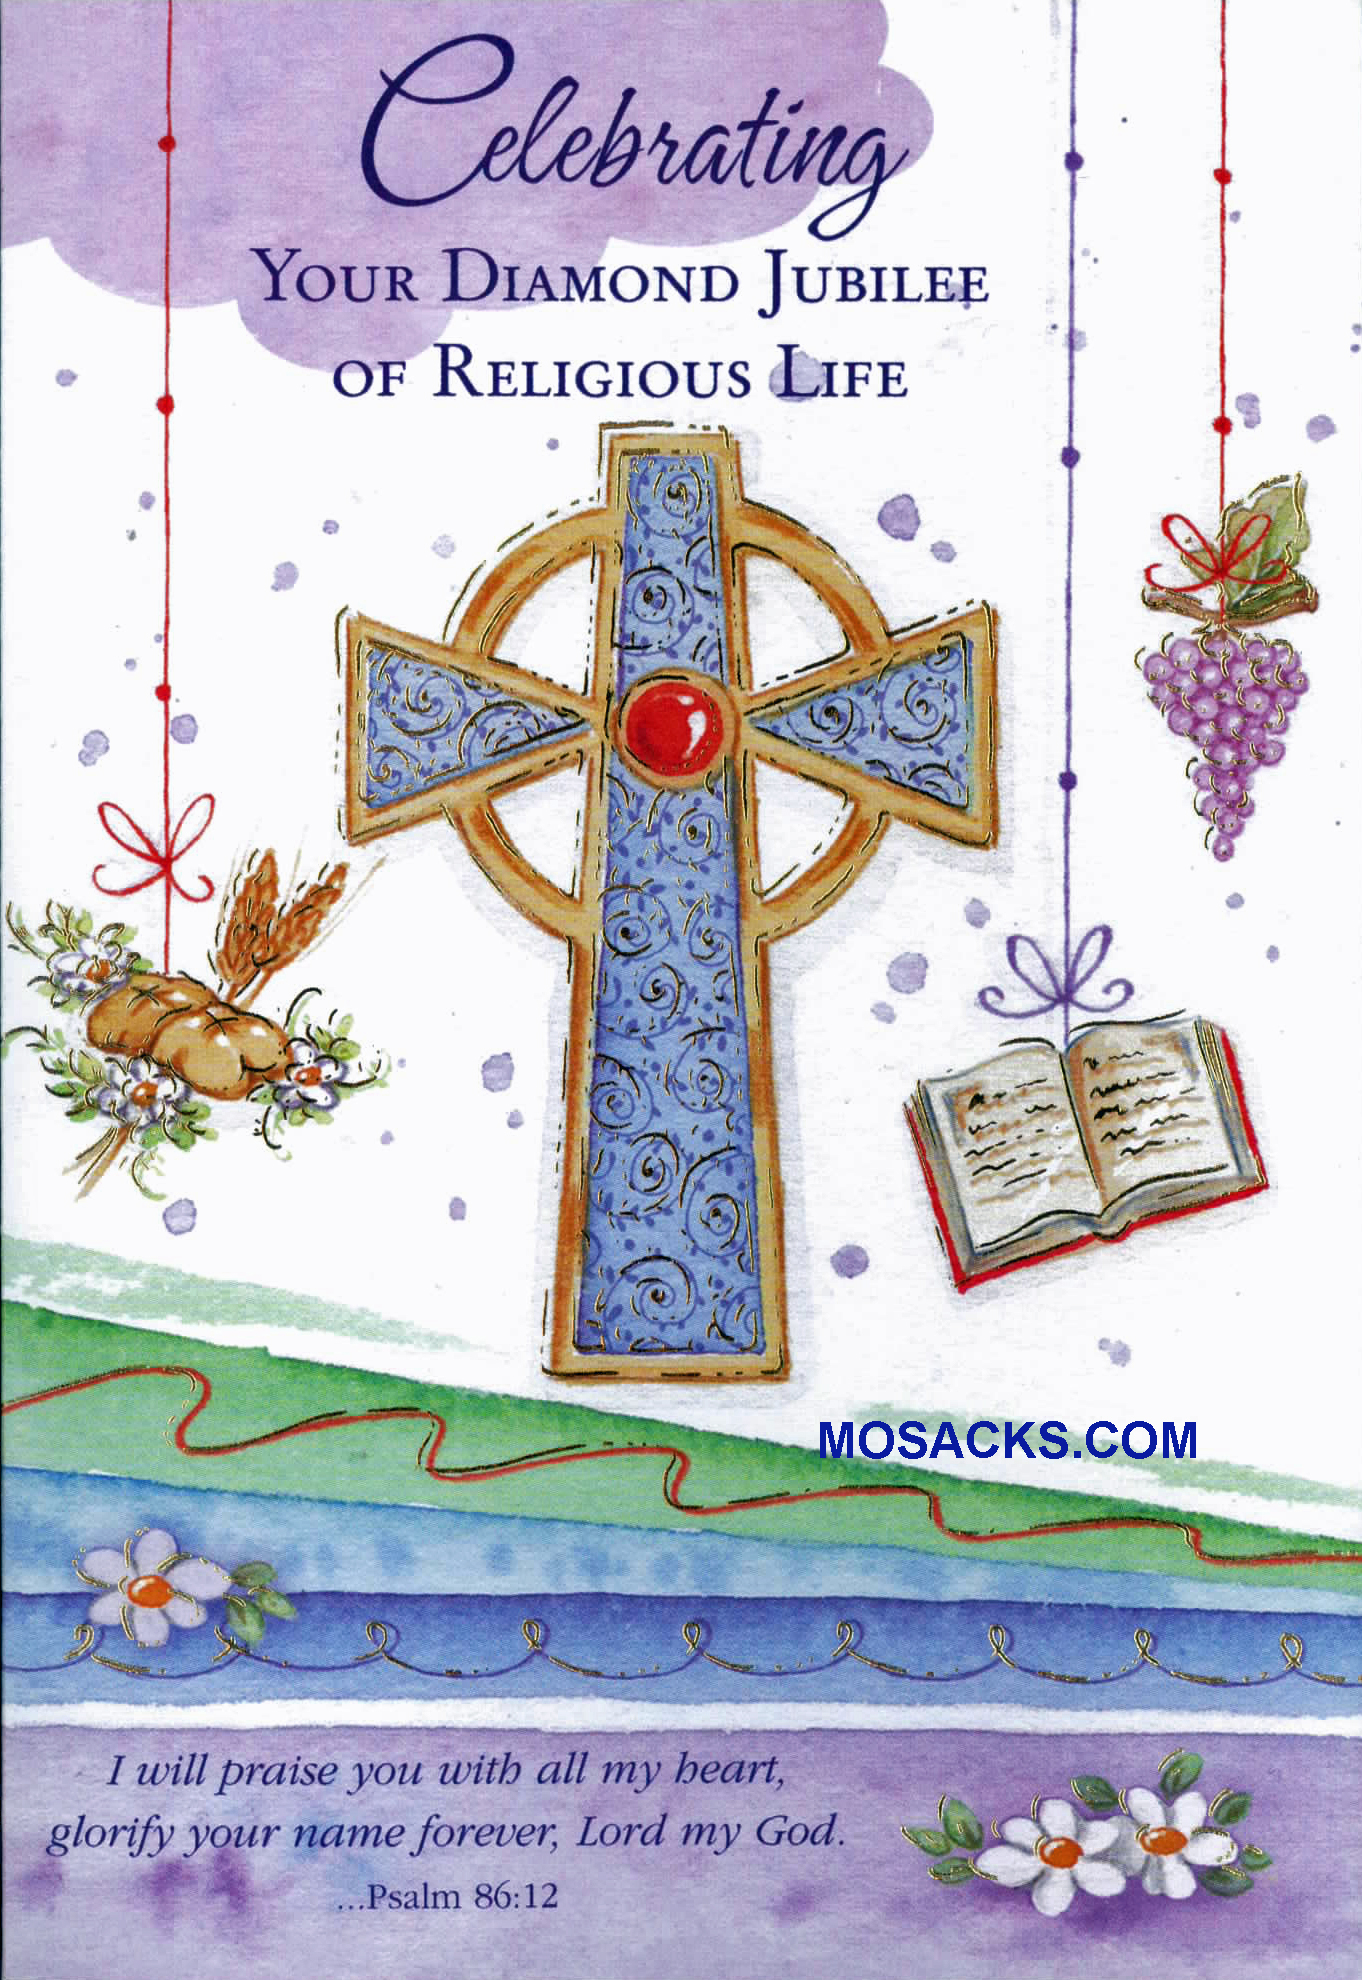 Jubilee, Anniversary of Religious Life Greeting Cards